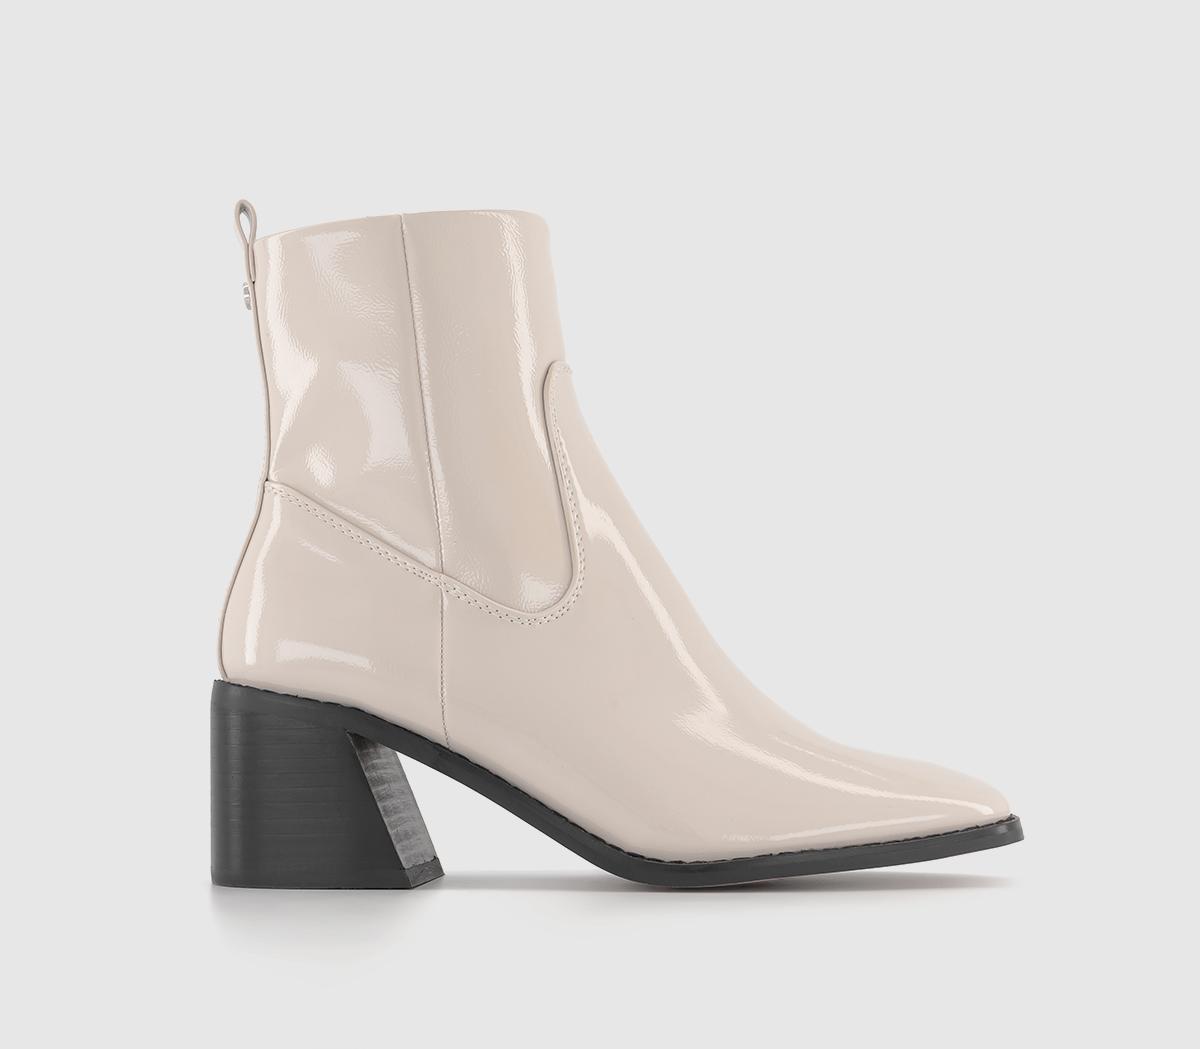 OFFICEAspire Low Block Heel Ankle BootsPatent Off White